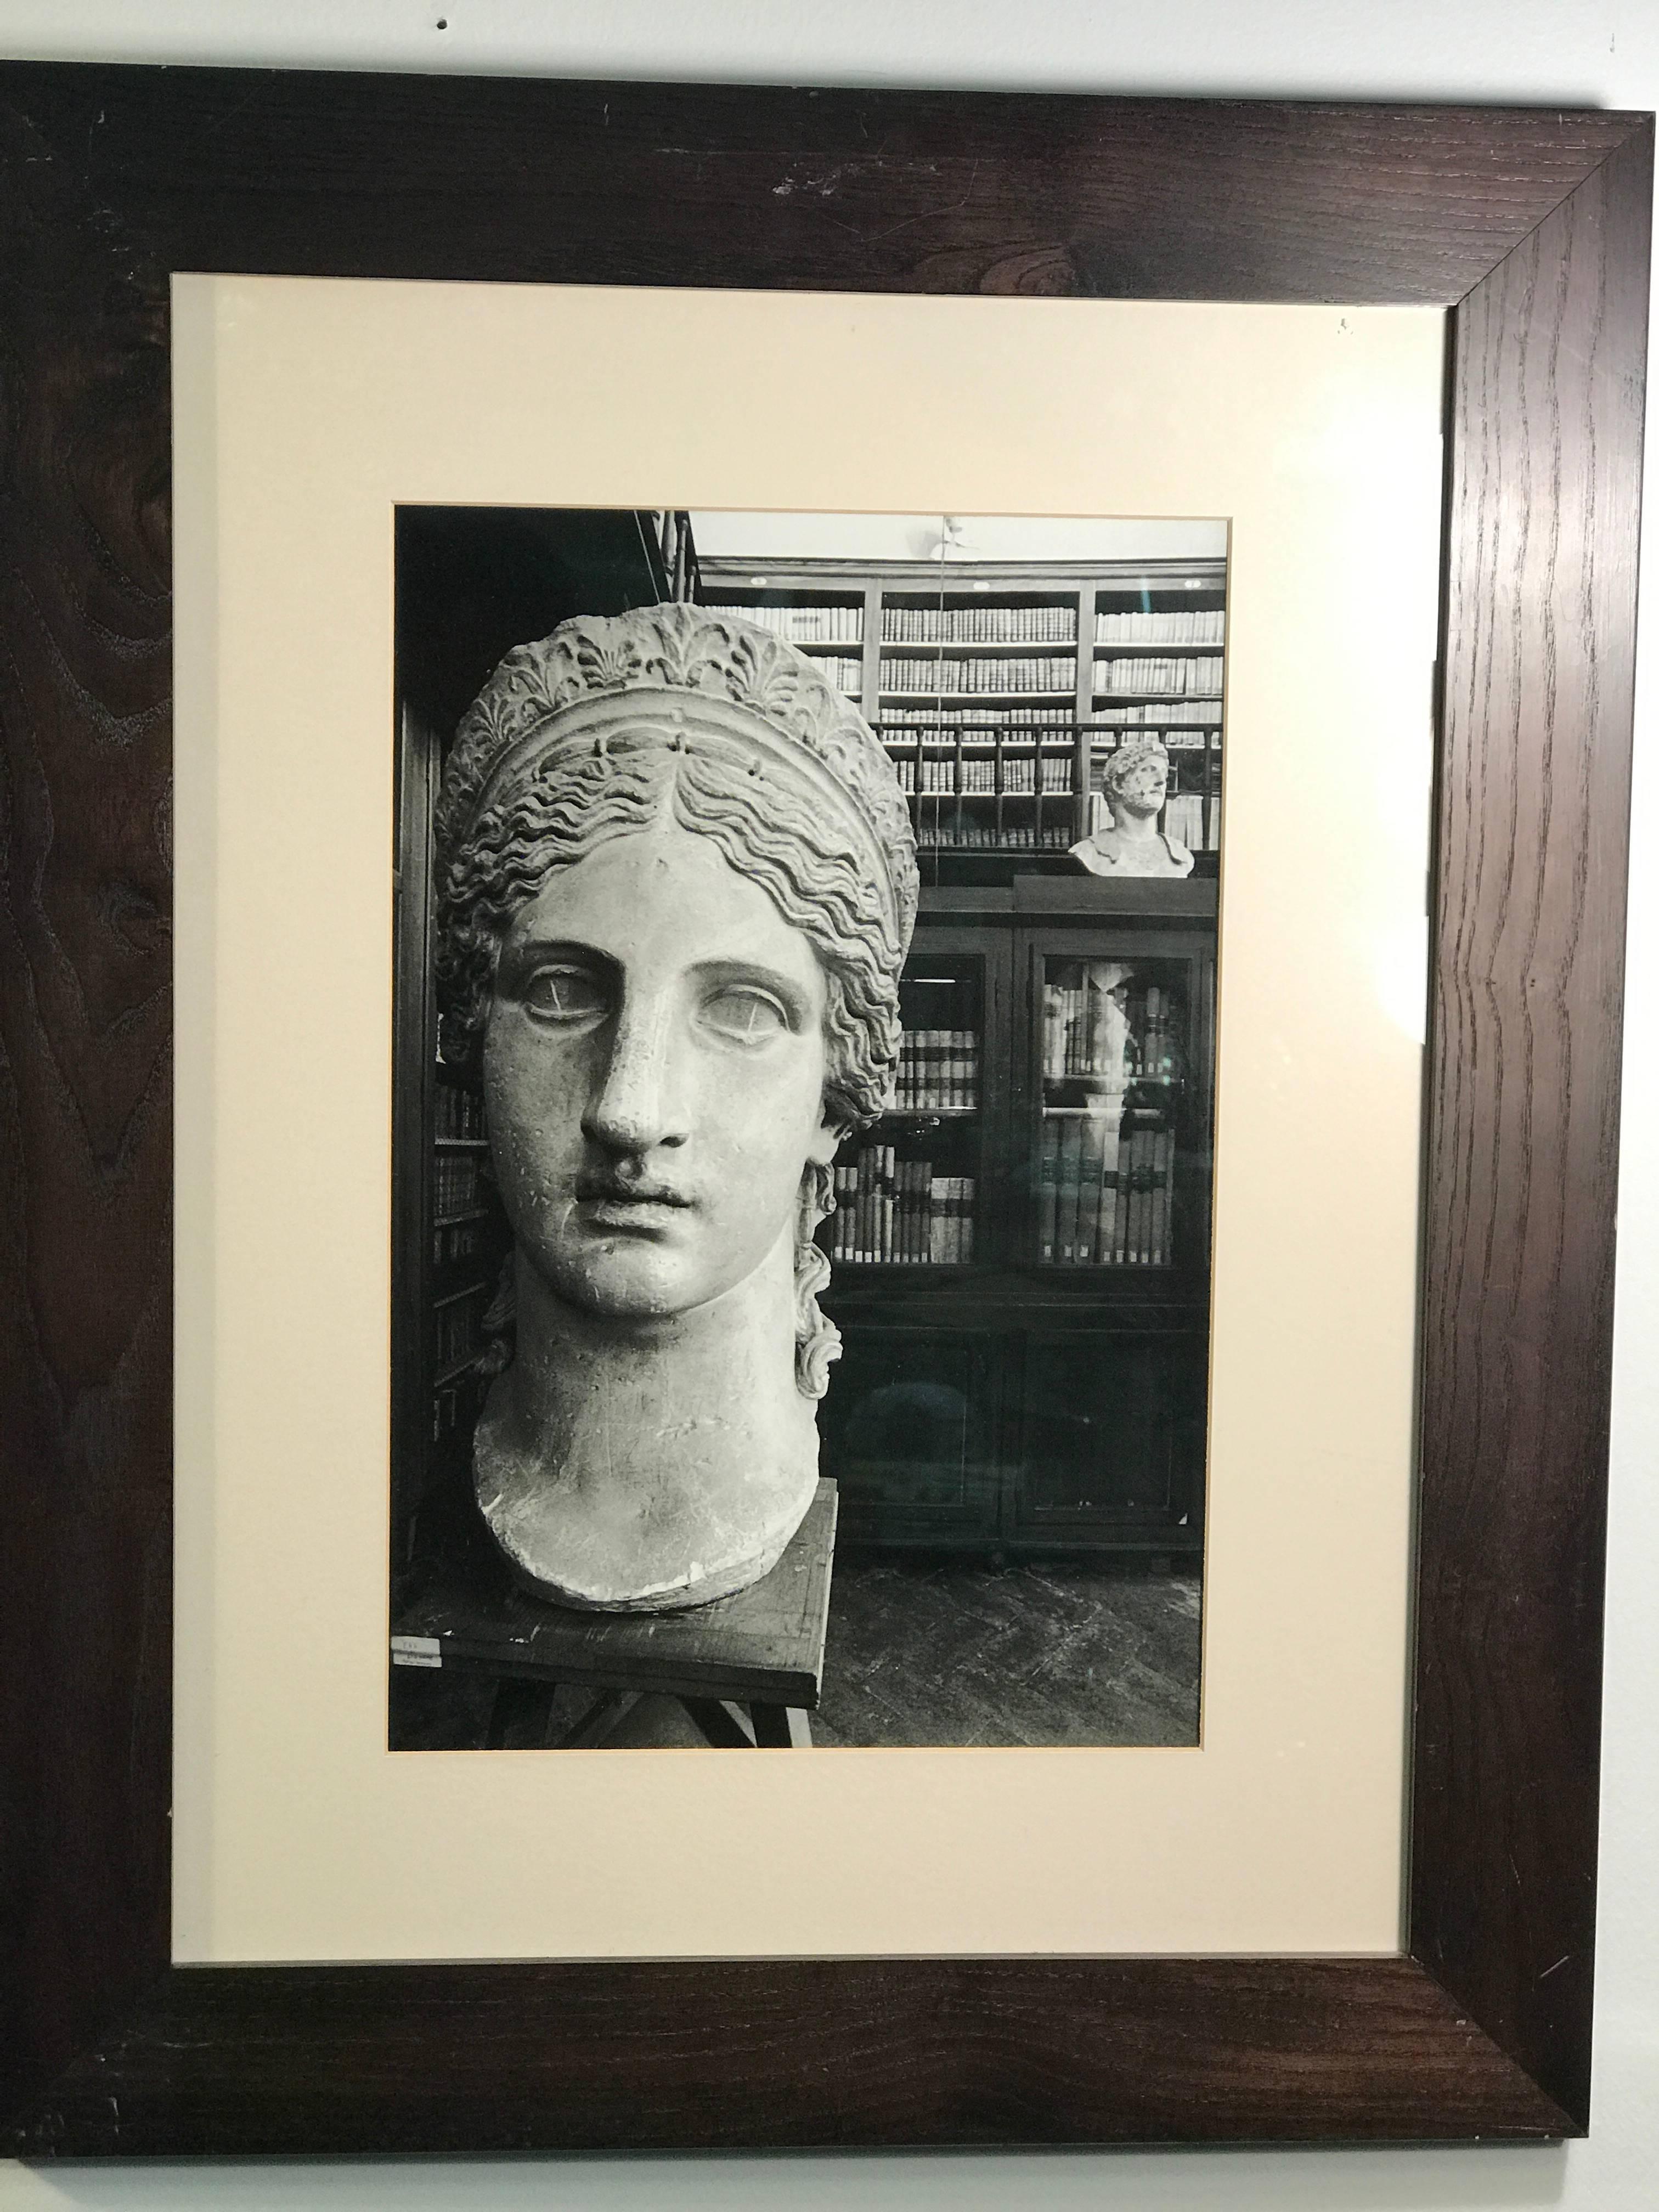 A set of two exceptional quality photographs of Roman busts in modern frames. Signed and dated 2002.